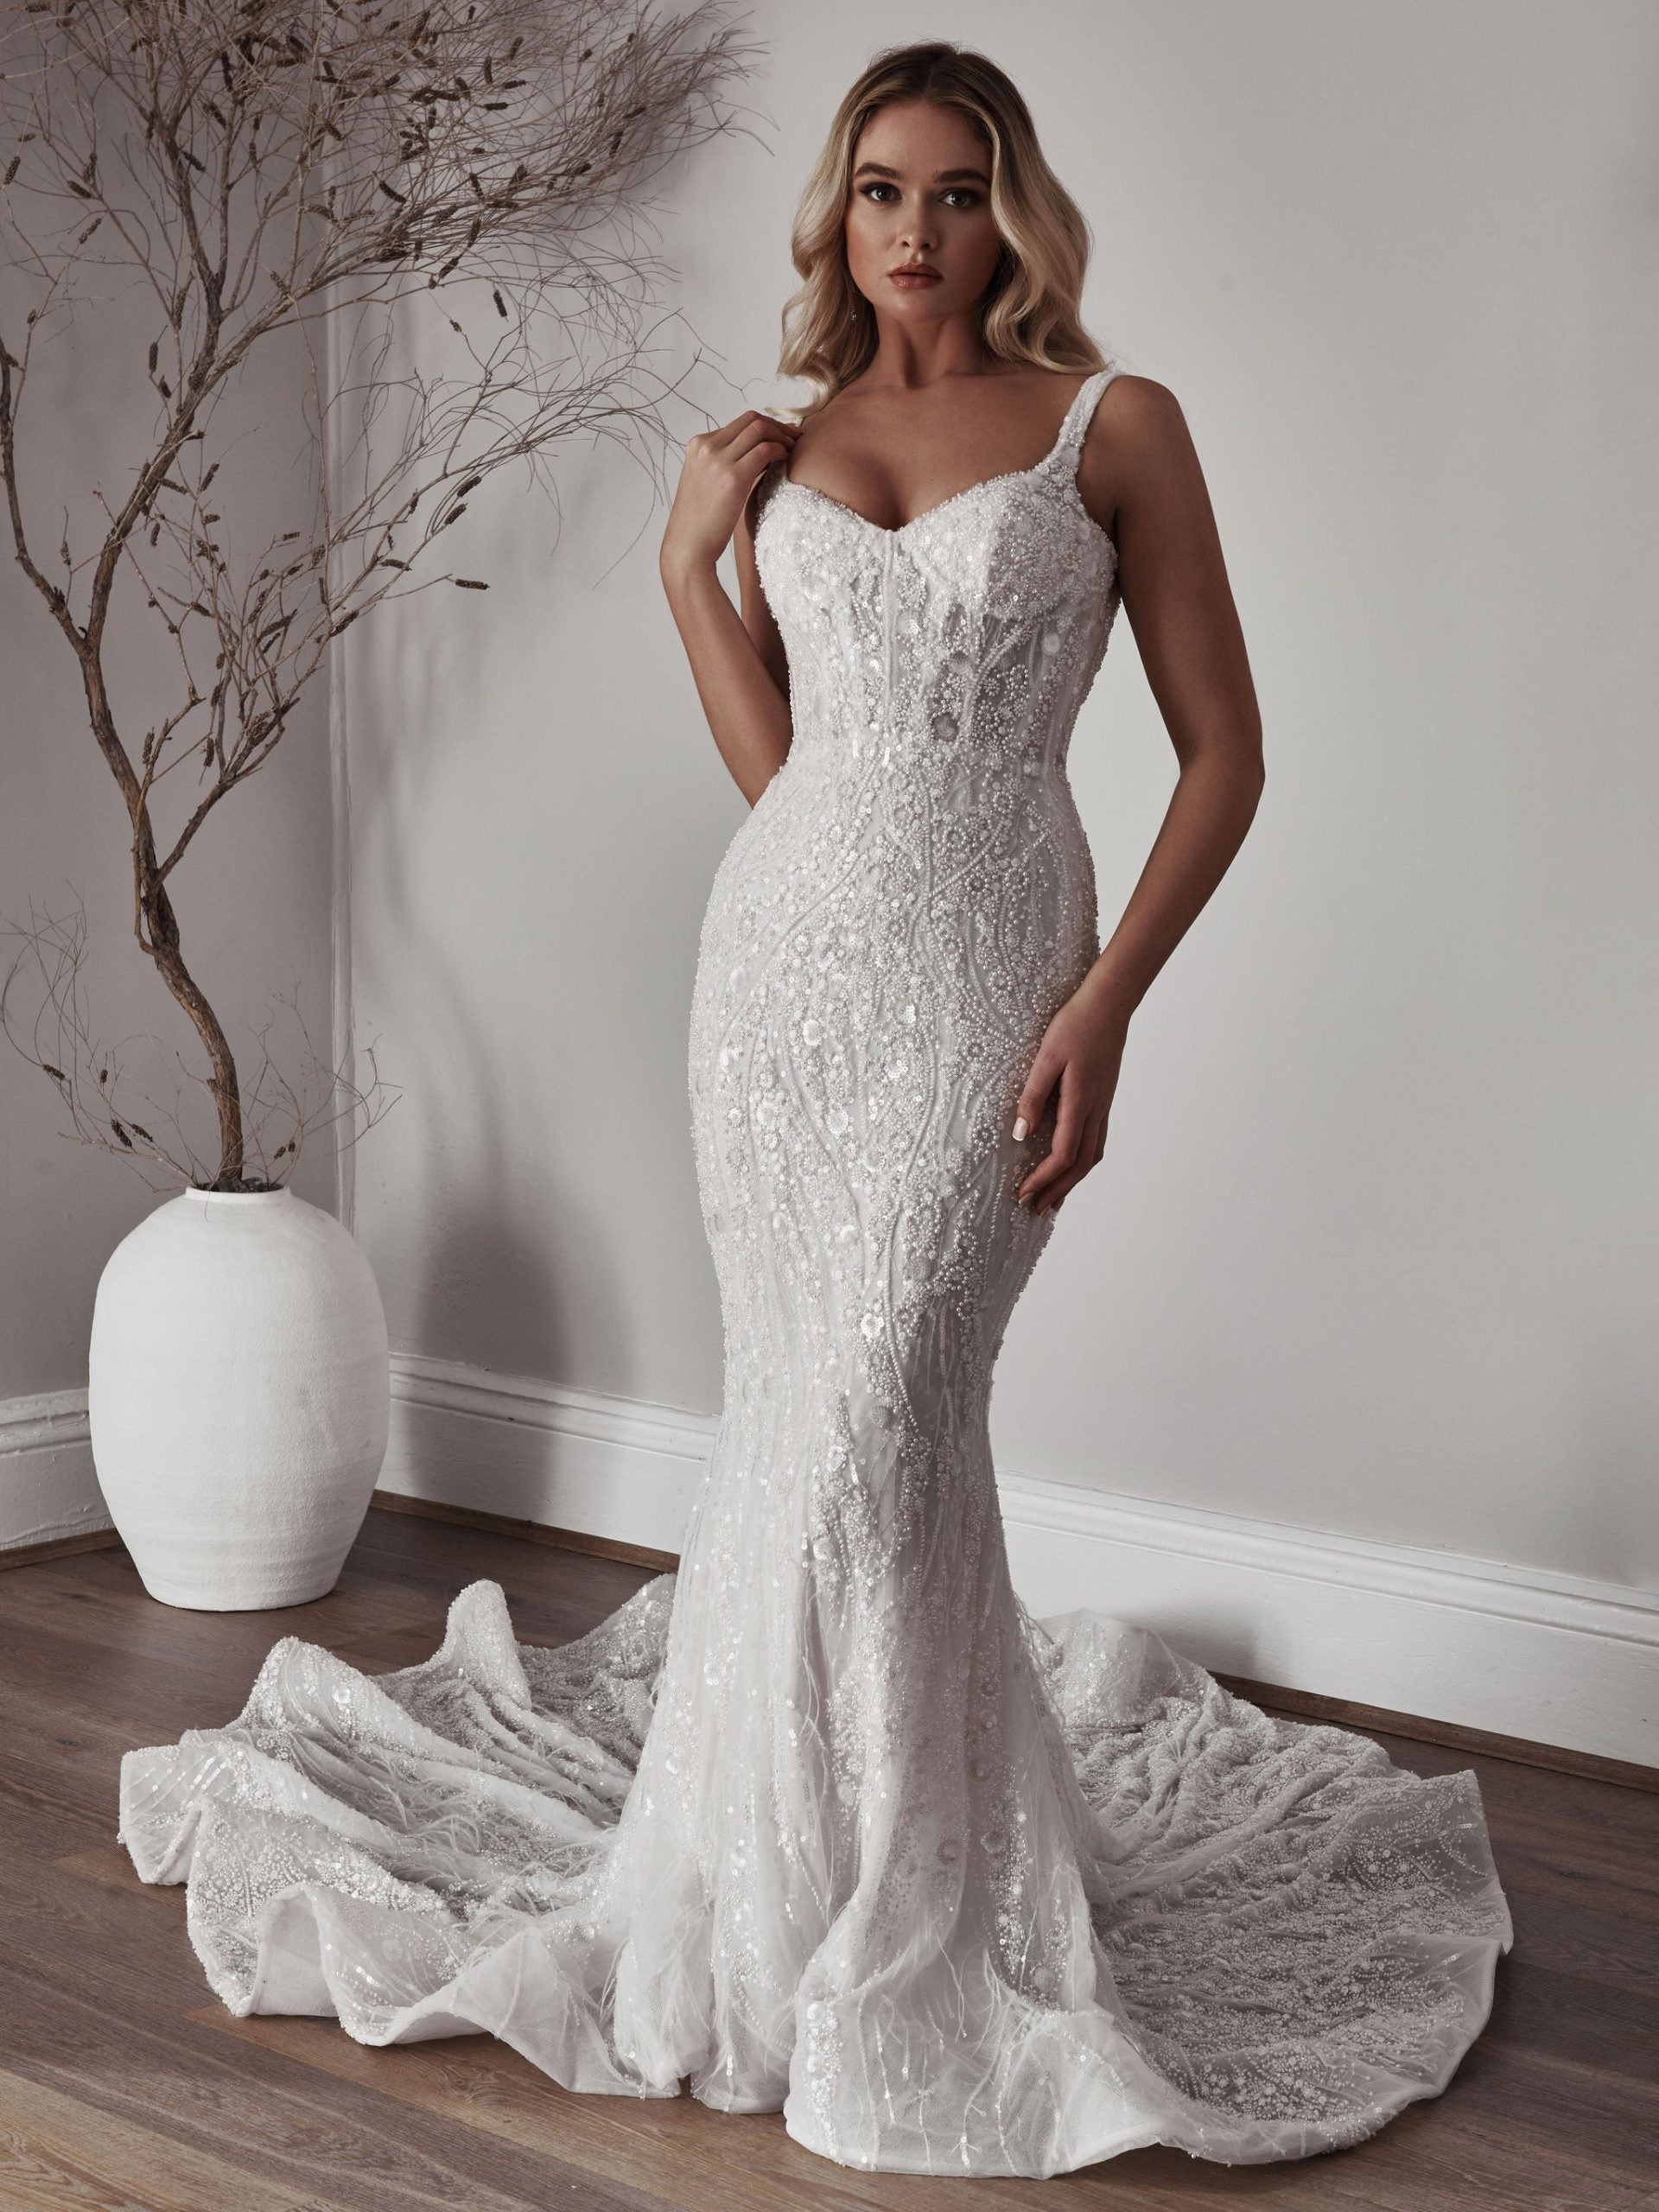 Chic and Sexy Beaded Fit-and-Flare Gown by Blanche Bridal - Image 1